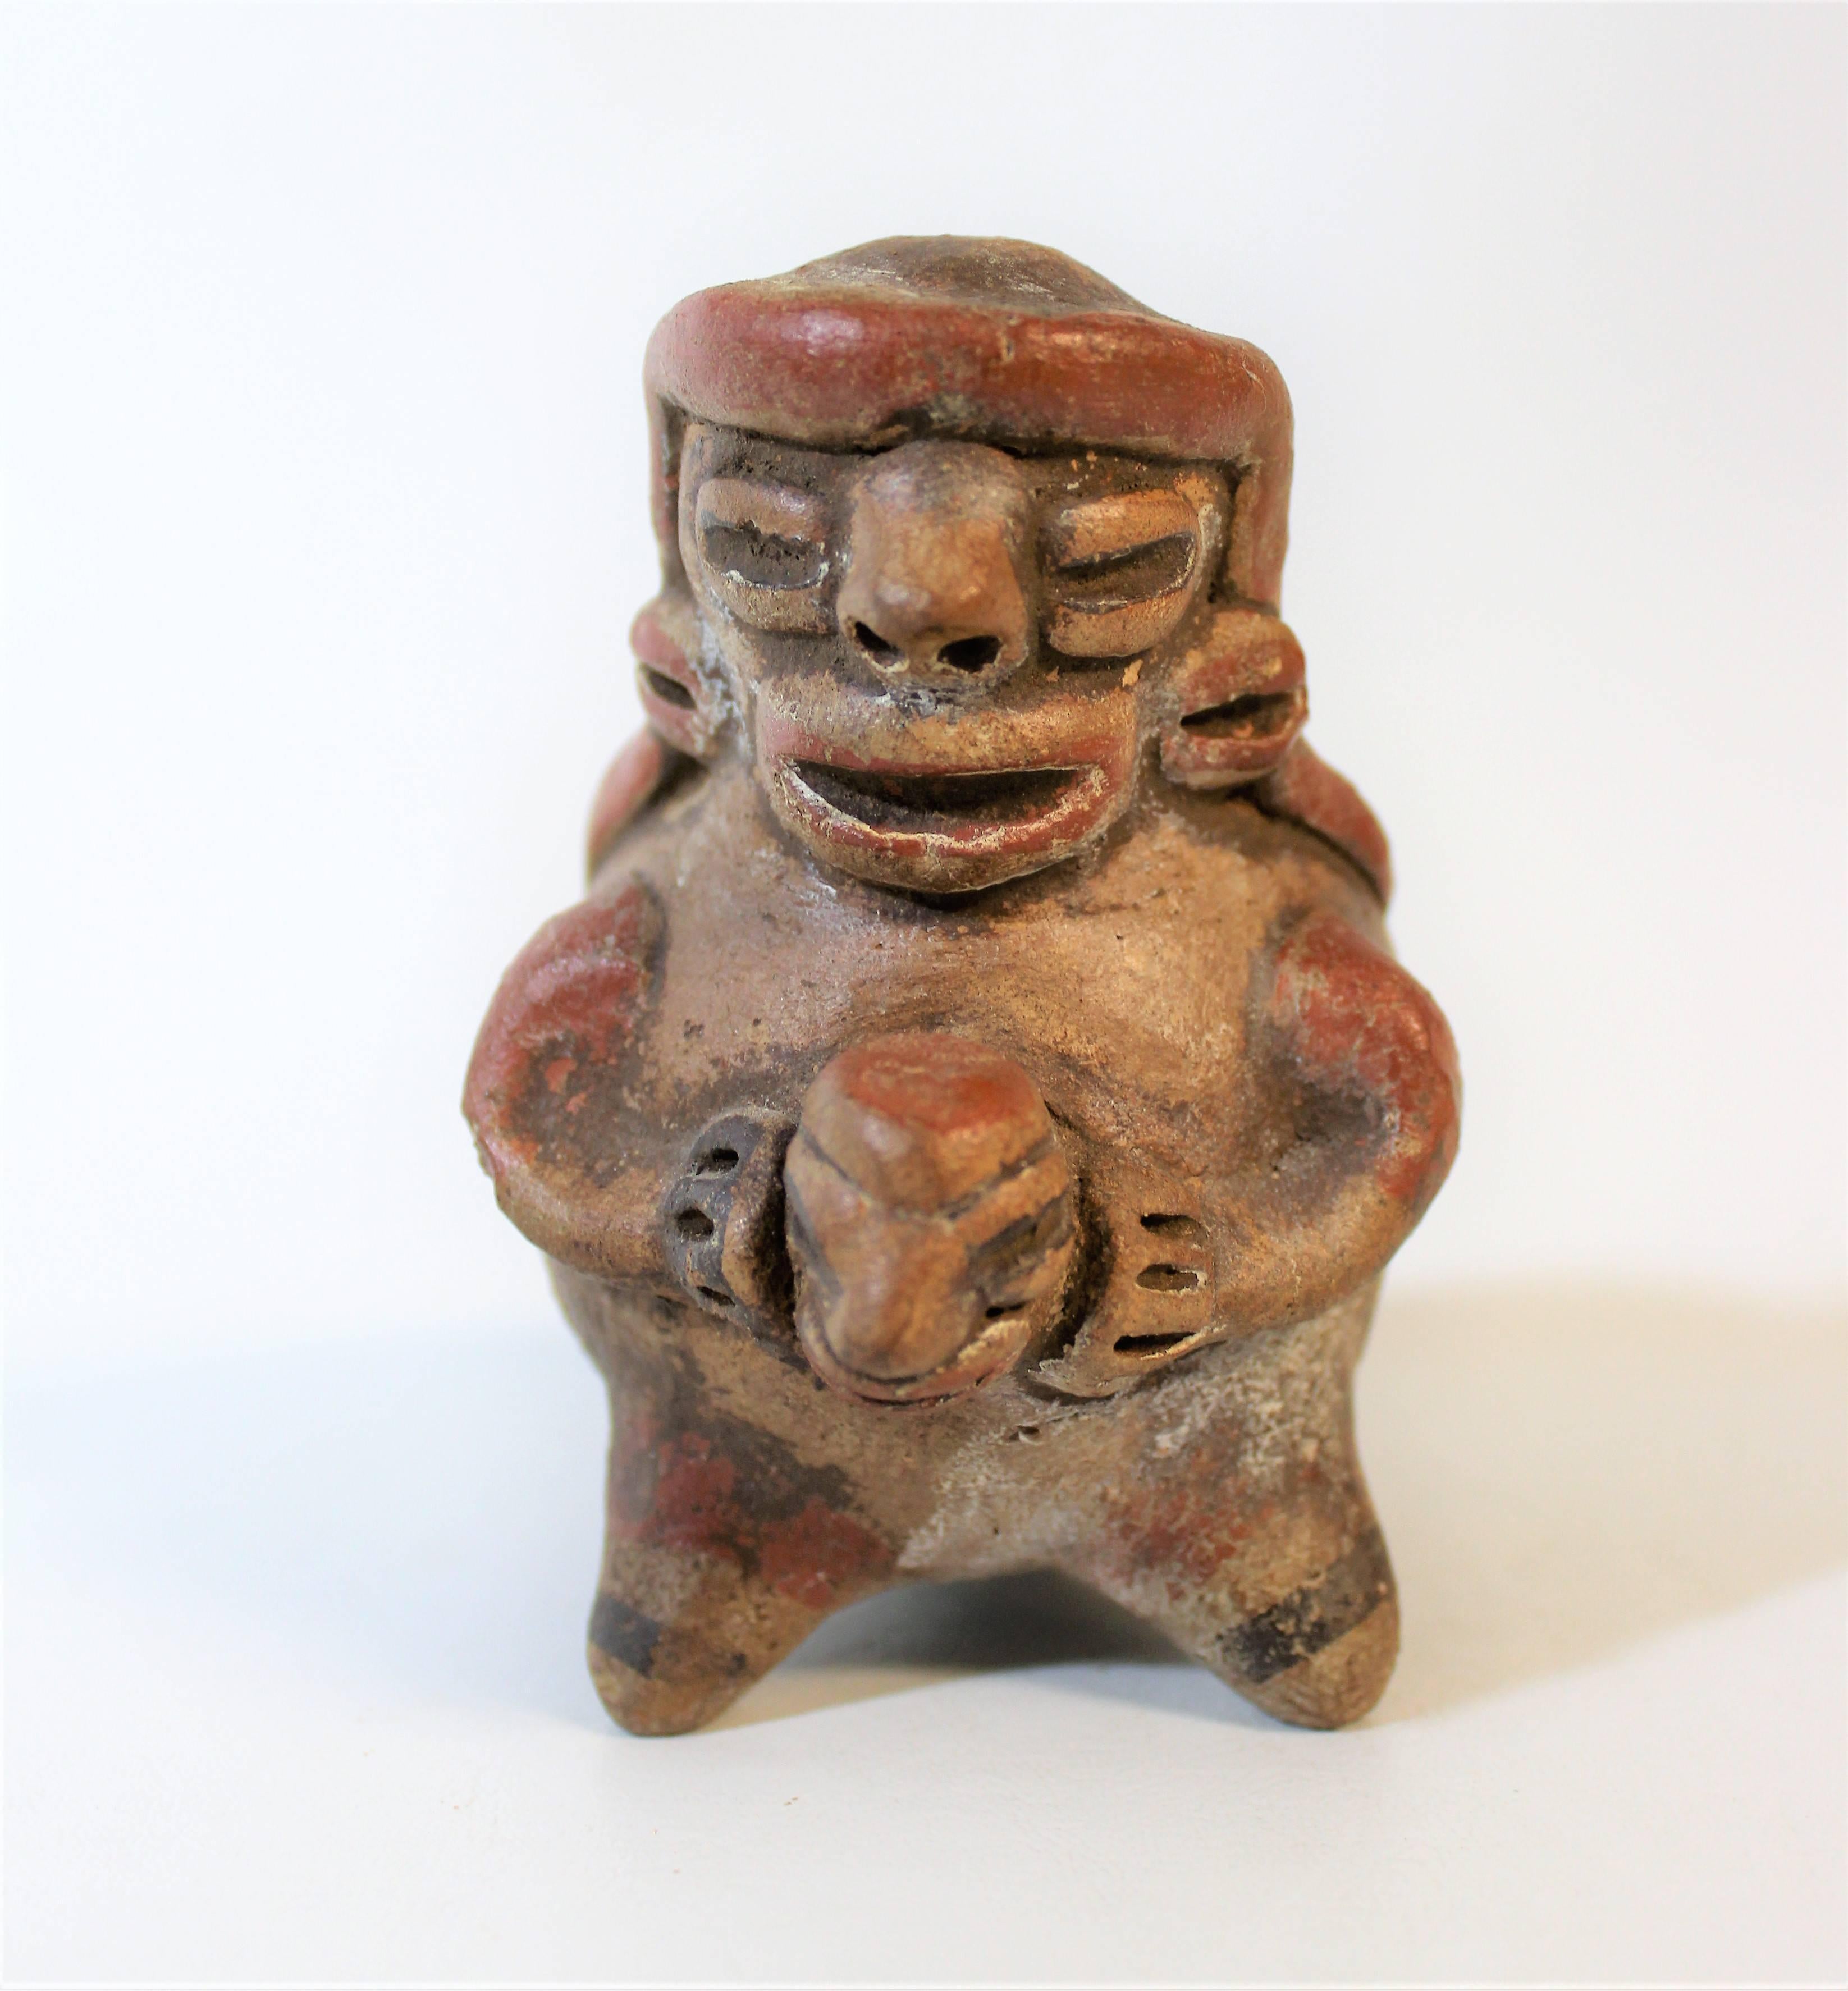 A refined Pre-Columbian artist who was deeply engrossed in portraying the divine simplicity of sculpture and line undoubtedly created this exquisite Ocarina. The artist has paid special attention to create a beautiful polychrome design on its body.